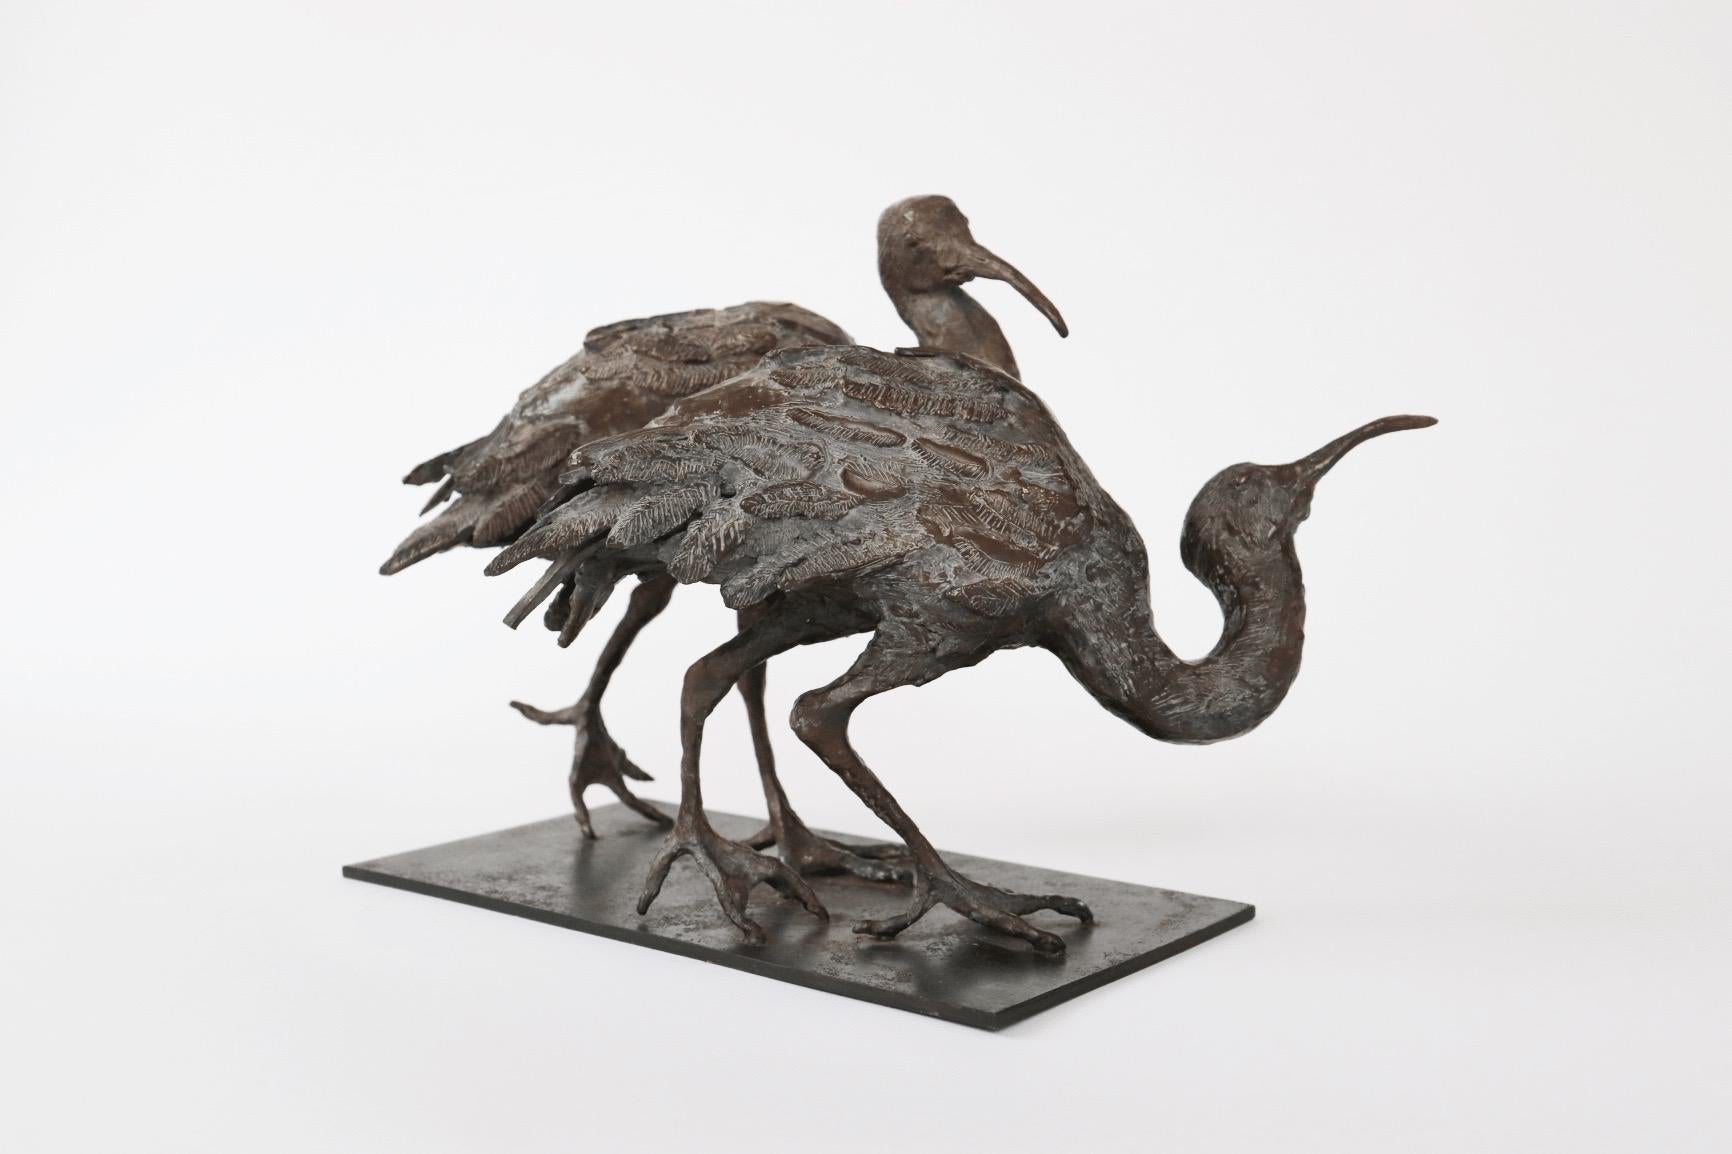 Two Ibises by Chésade - Bronze animal sculpture, birds, realistic, expressive For Sale 2